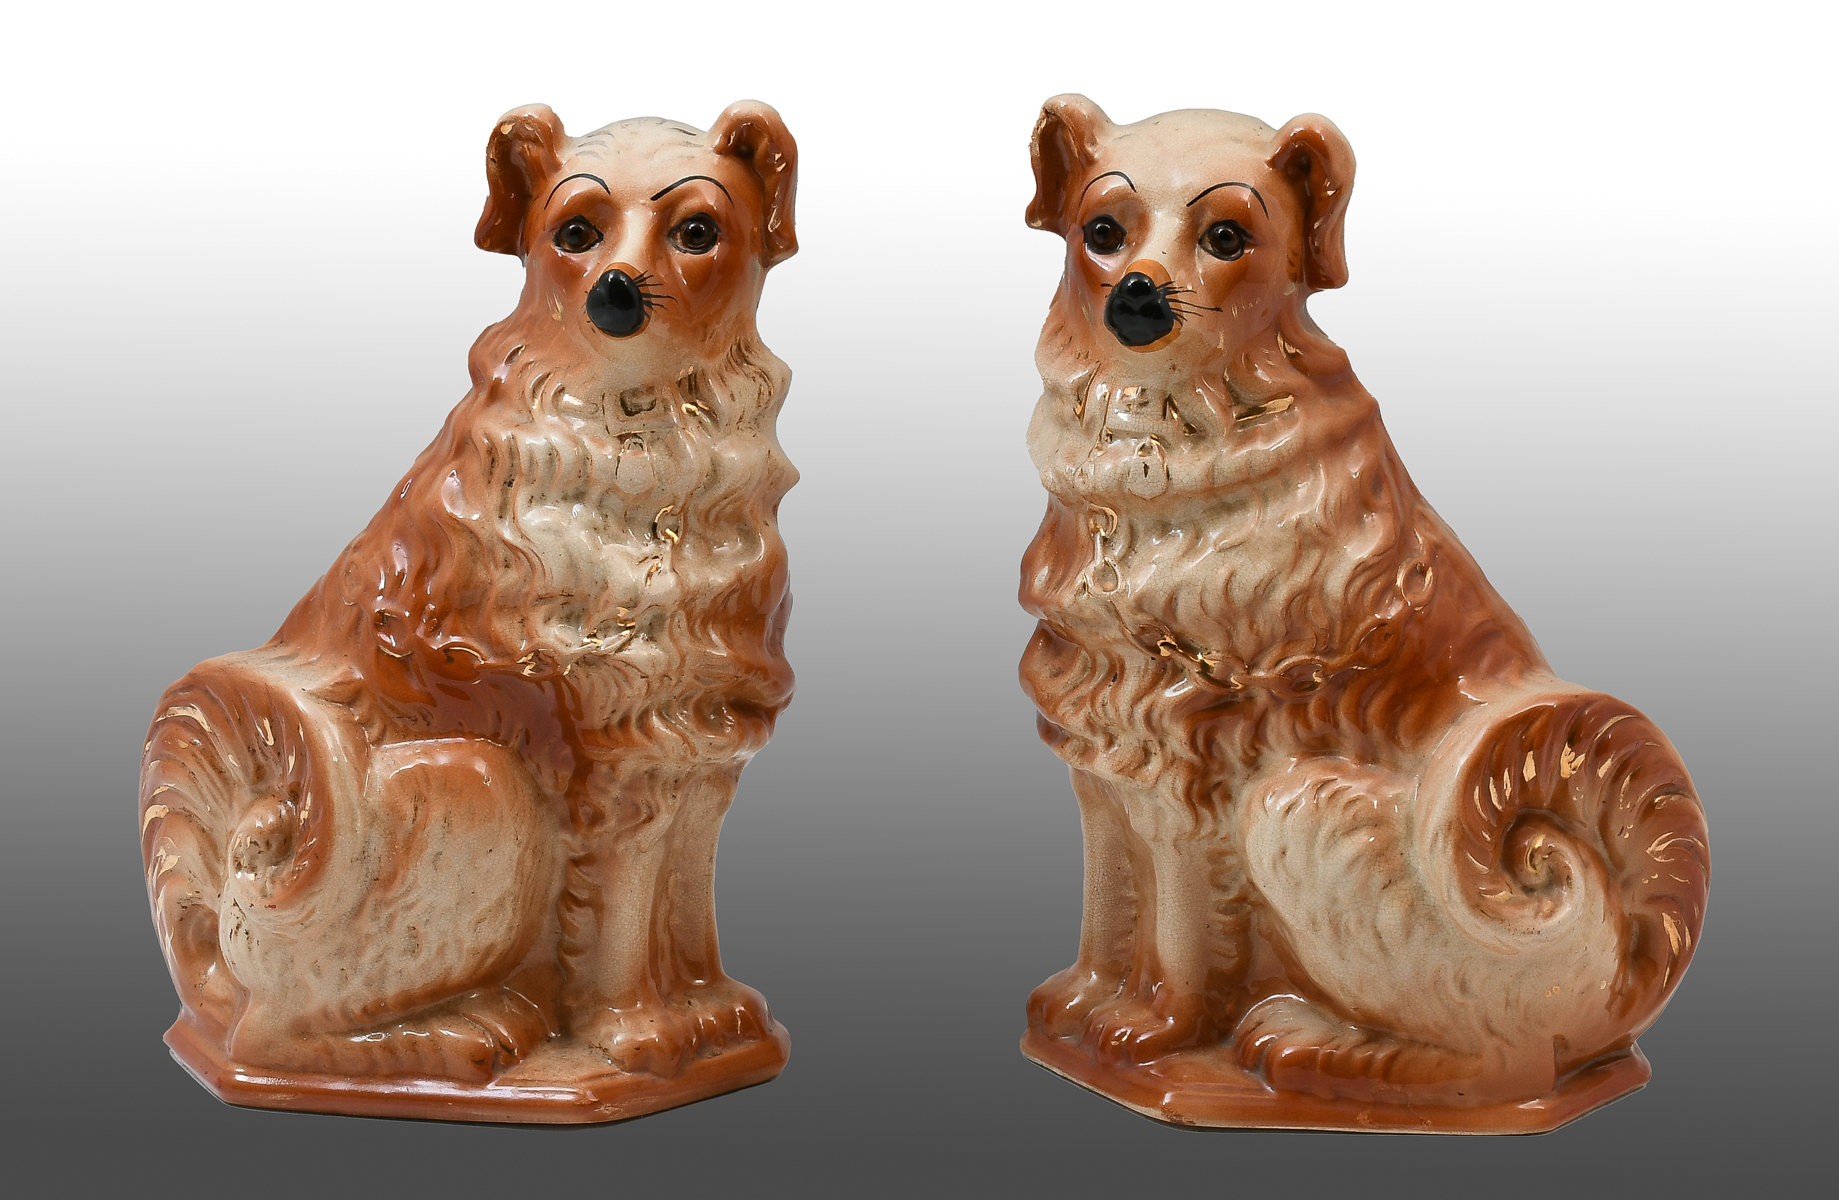 PAIR BROWN STAFFORSHIRE DOGS: 19th century